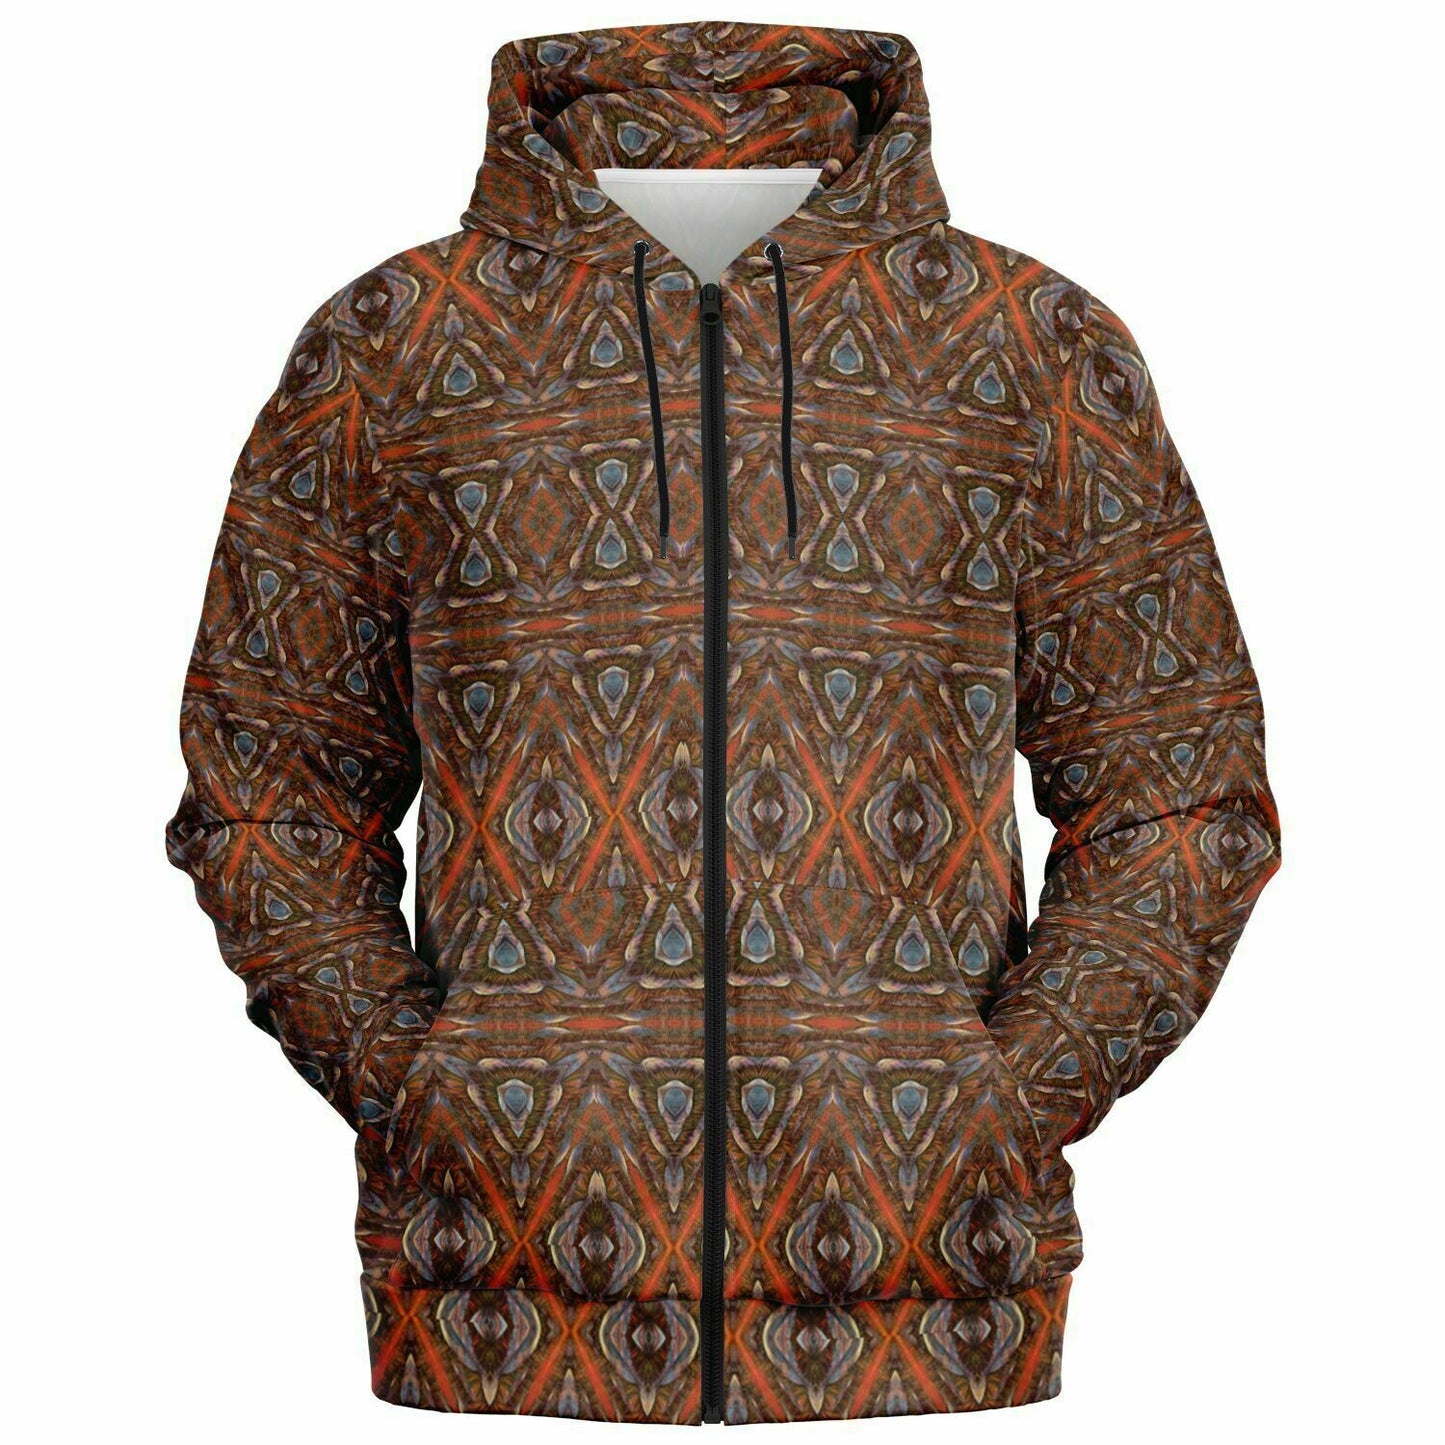 unique hoodie with a cool print